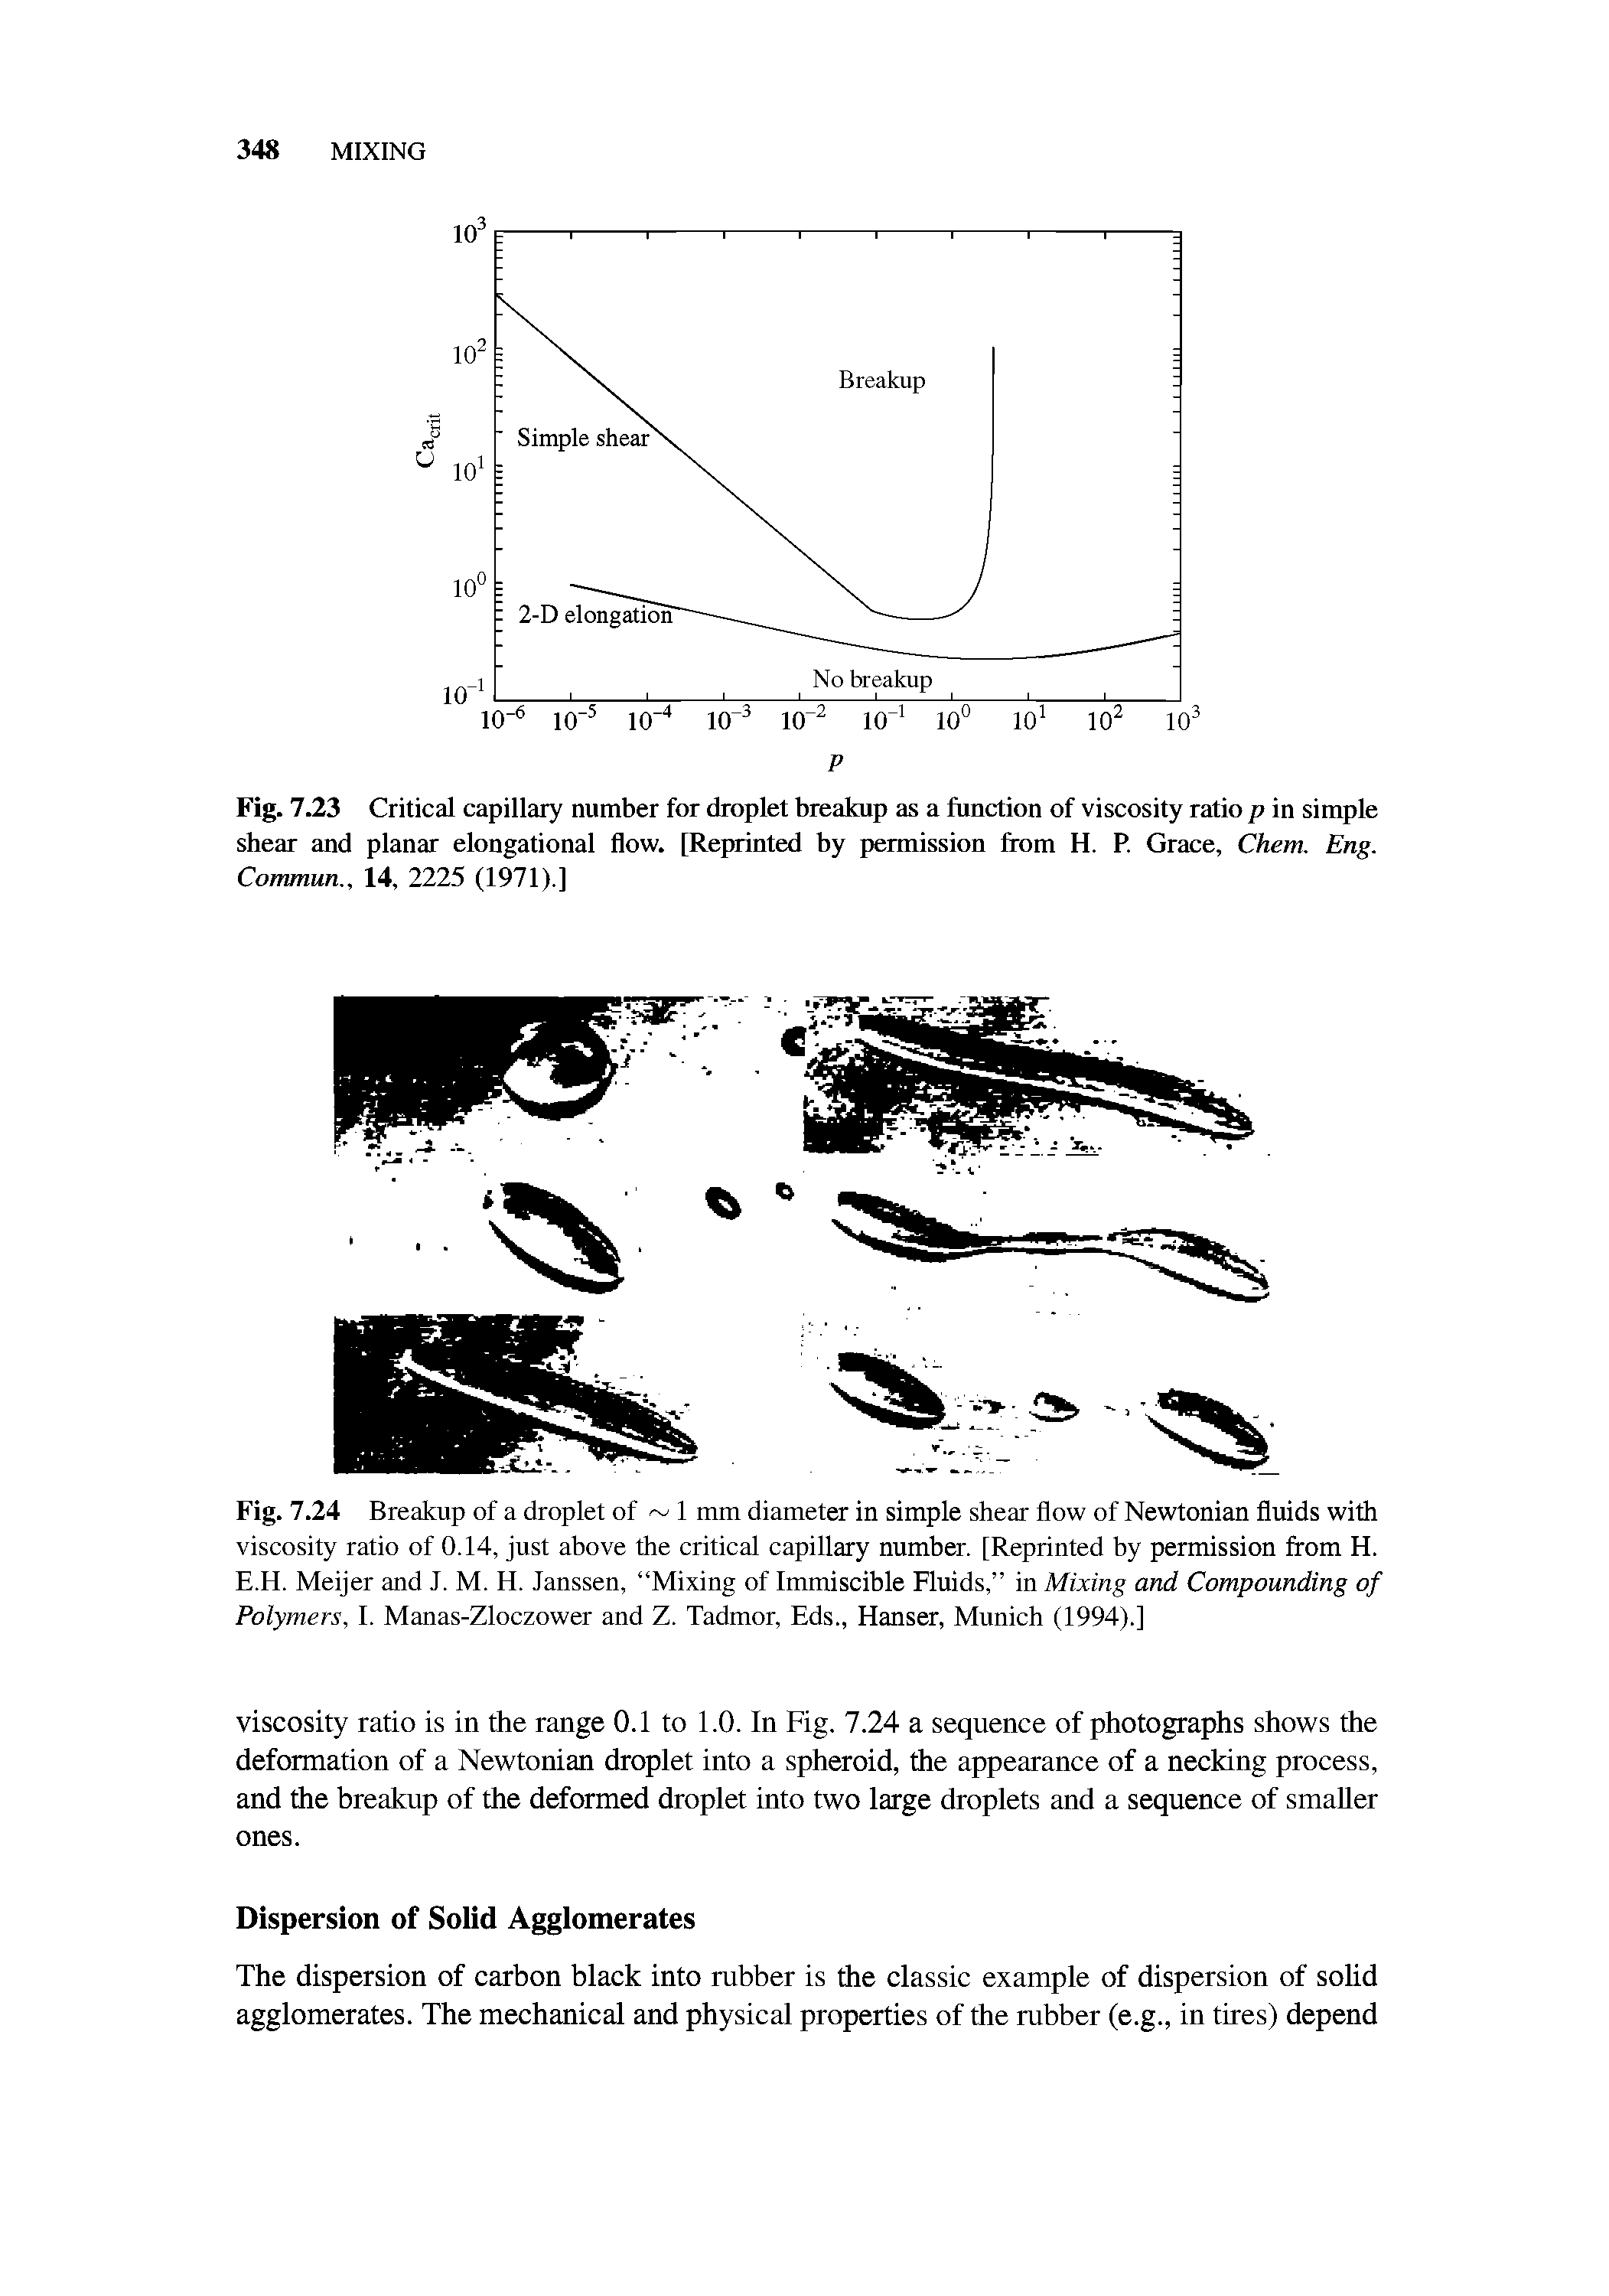 Fig. 7.23 Critical capillary number for droplet breakup as a function of viscosity ratio p in simple shear and planar elongational flow. [Reprinted by permission from H. P. Grace, Chem. Eng. Commun., 14, 2225 (1971).]...